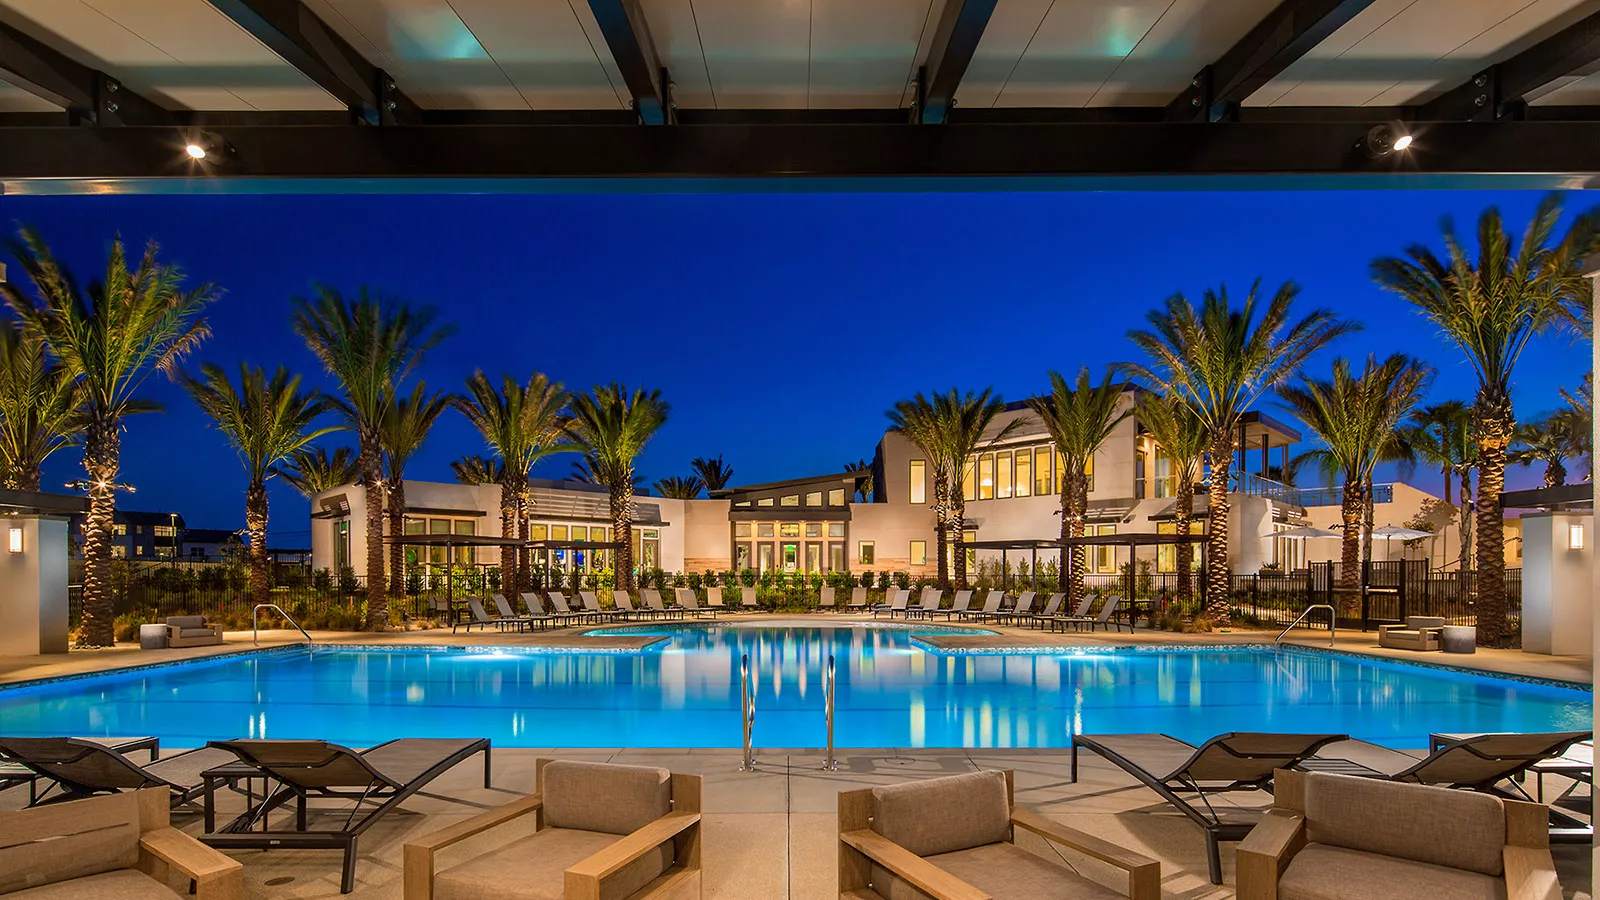 Pool at dusk | The Resort | New Homes in Rancho Cucamonga, CA